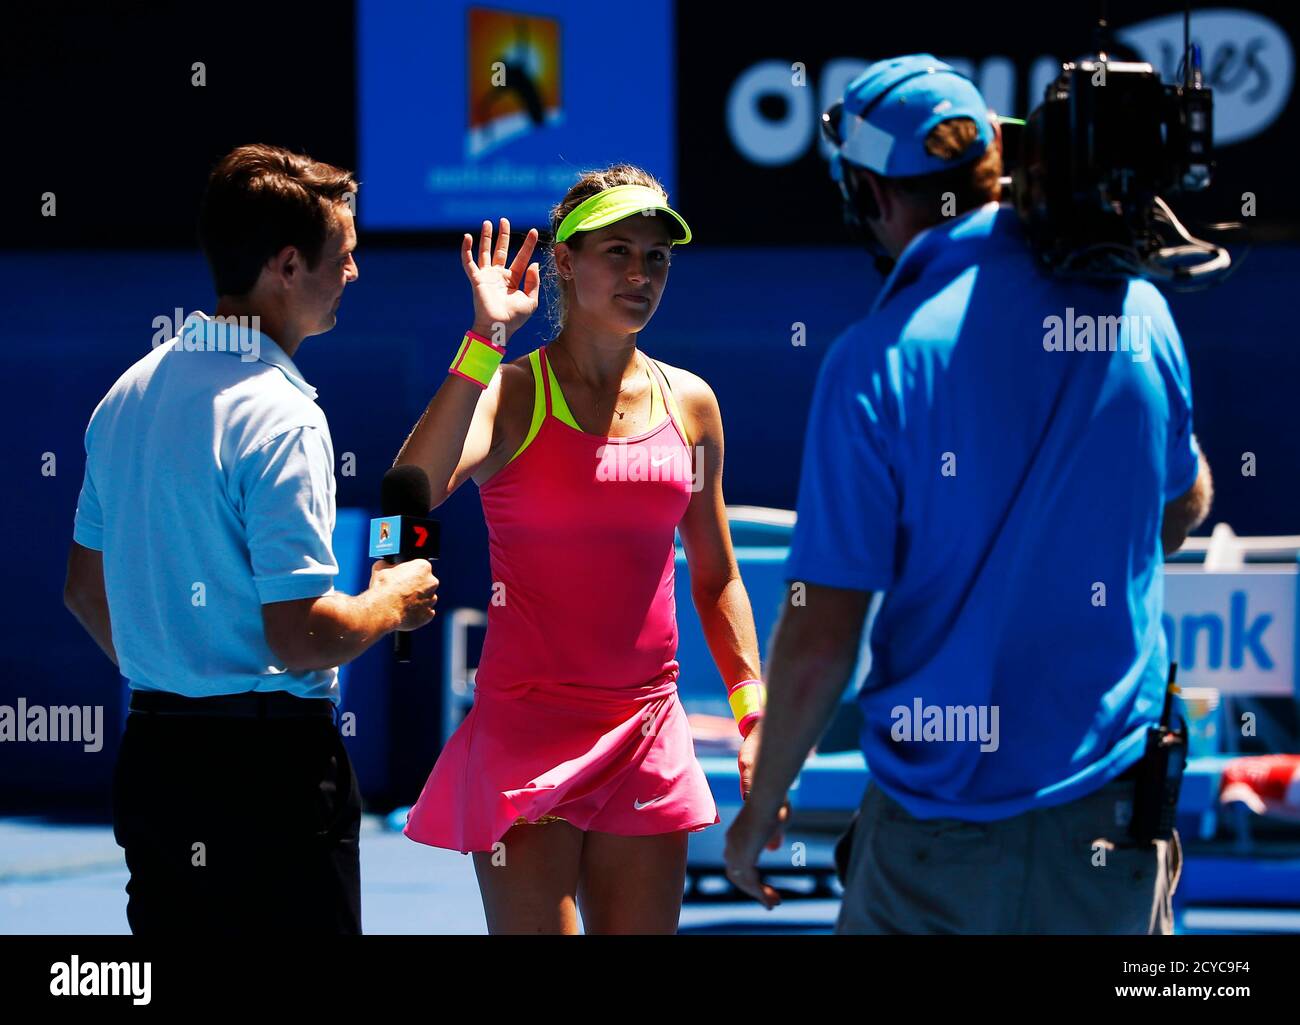 Eugenie Bouchard of Canada waves to the crowd after a television interview  on the court after defeating Caroline Garcia of France in their women's  singles third round match at the Australian Open